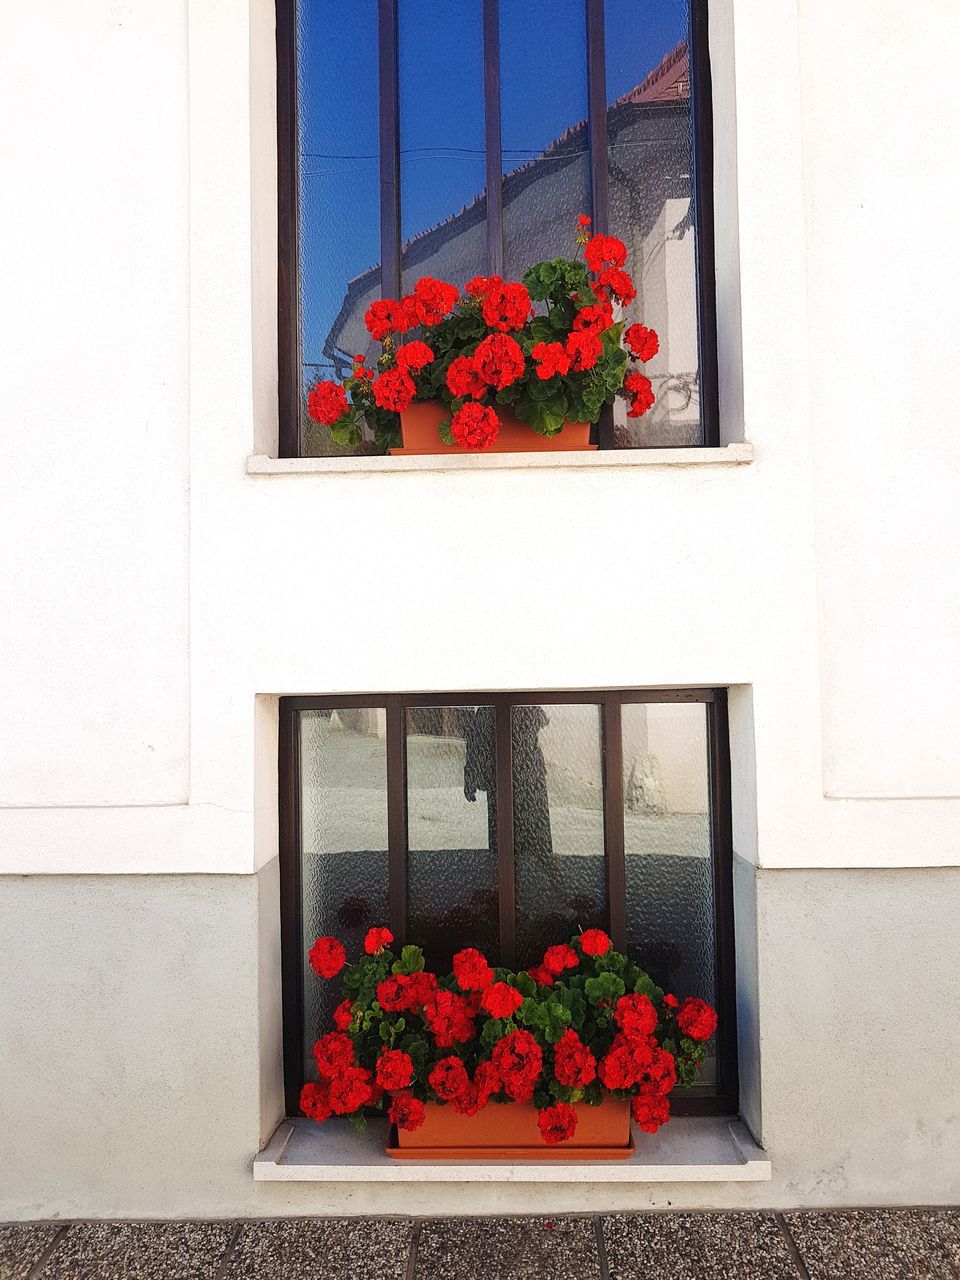 flower, flowering plant, plant, window, red, architecture, building exterior, nature, built structure, building, no people, day, freshness, house, glass, potted plant, outdoors, growth, beauty in nature, residential district, flowerpot, door, wall, entrance, fragility, wall - building feature, facade, window box, window sill, decoration, flower head, sunlight, interior design